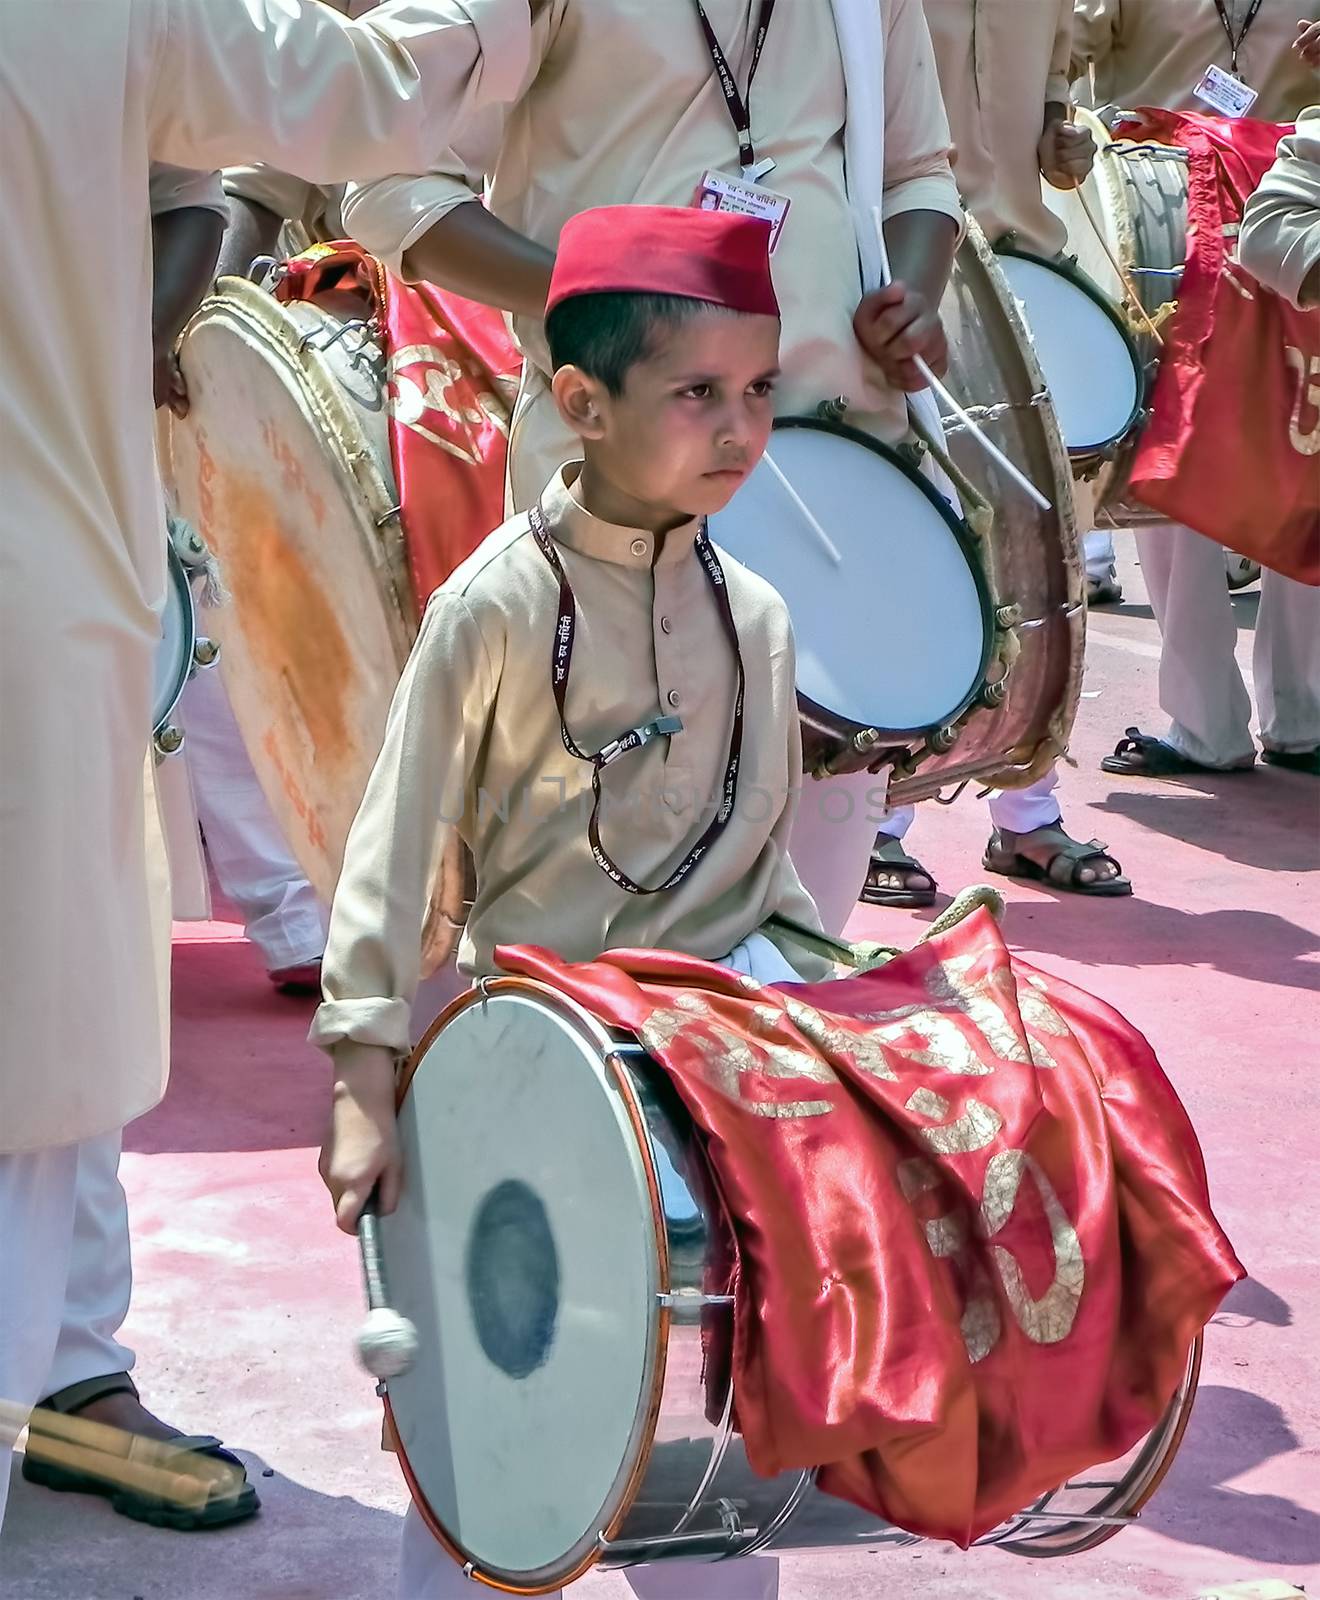 Pune,Maharashtra,India-September 22nd,2010: Little boy with red cap beating huge traditional dhol during festival procession of ganesh.